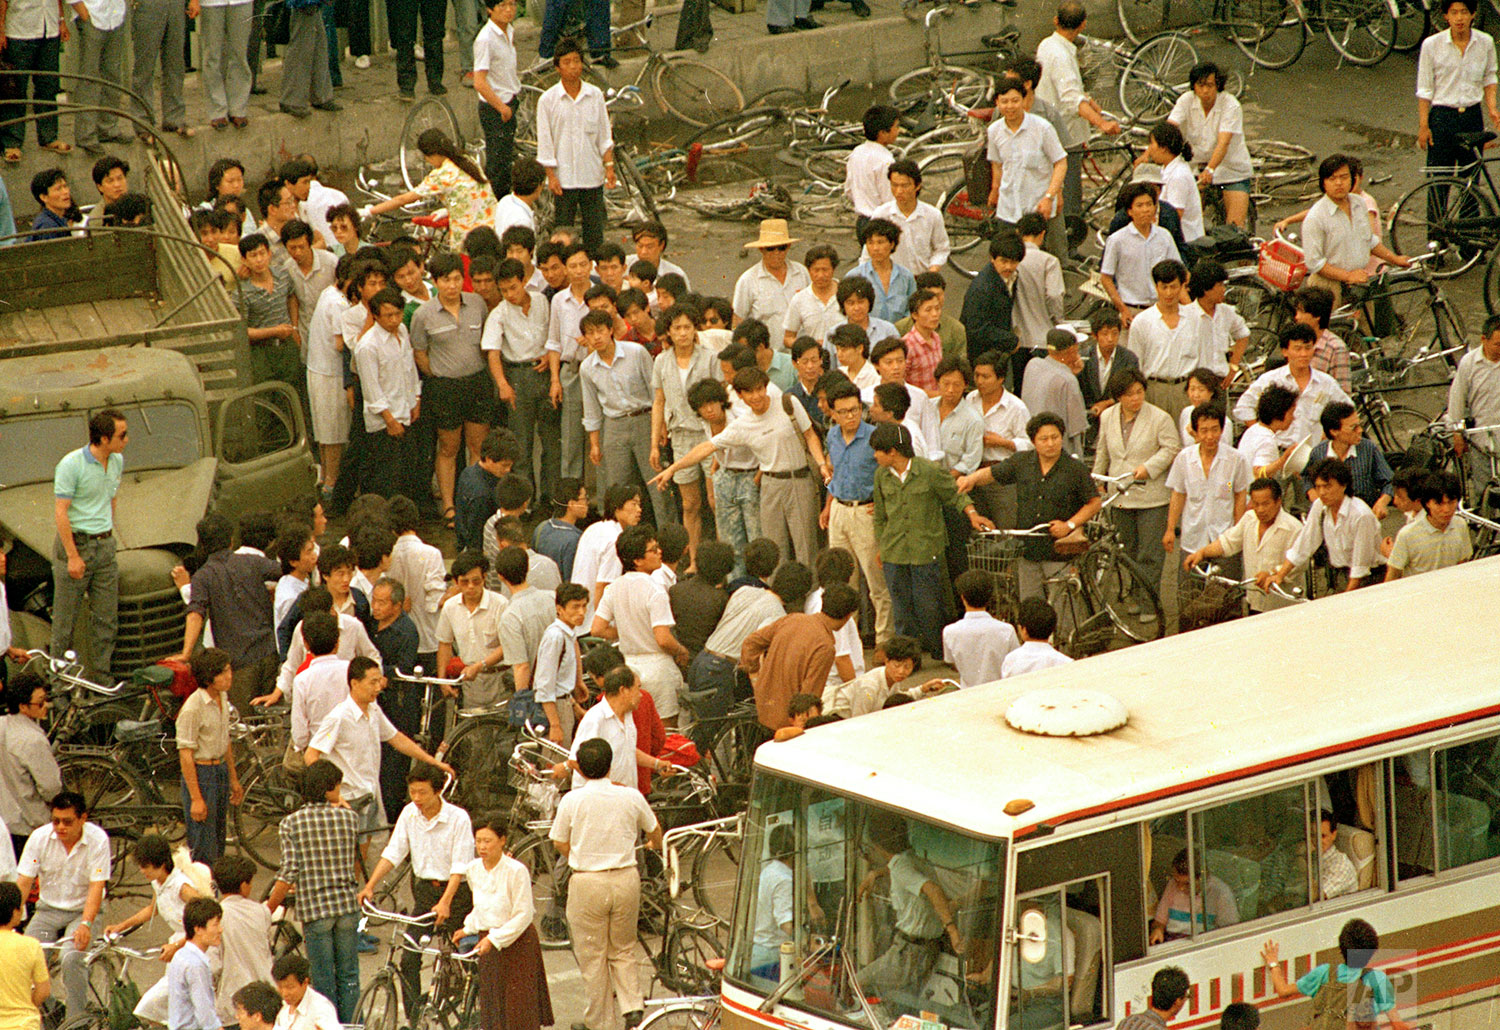  A crowd of Chinese opens hole to give a busload of foreign tourists a view of a dead body Monday morning, June 5, 1989, of victim of the first night of violence as People's Liberation Army troops shot their way into Tiananmen Square to crush pro-dem